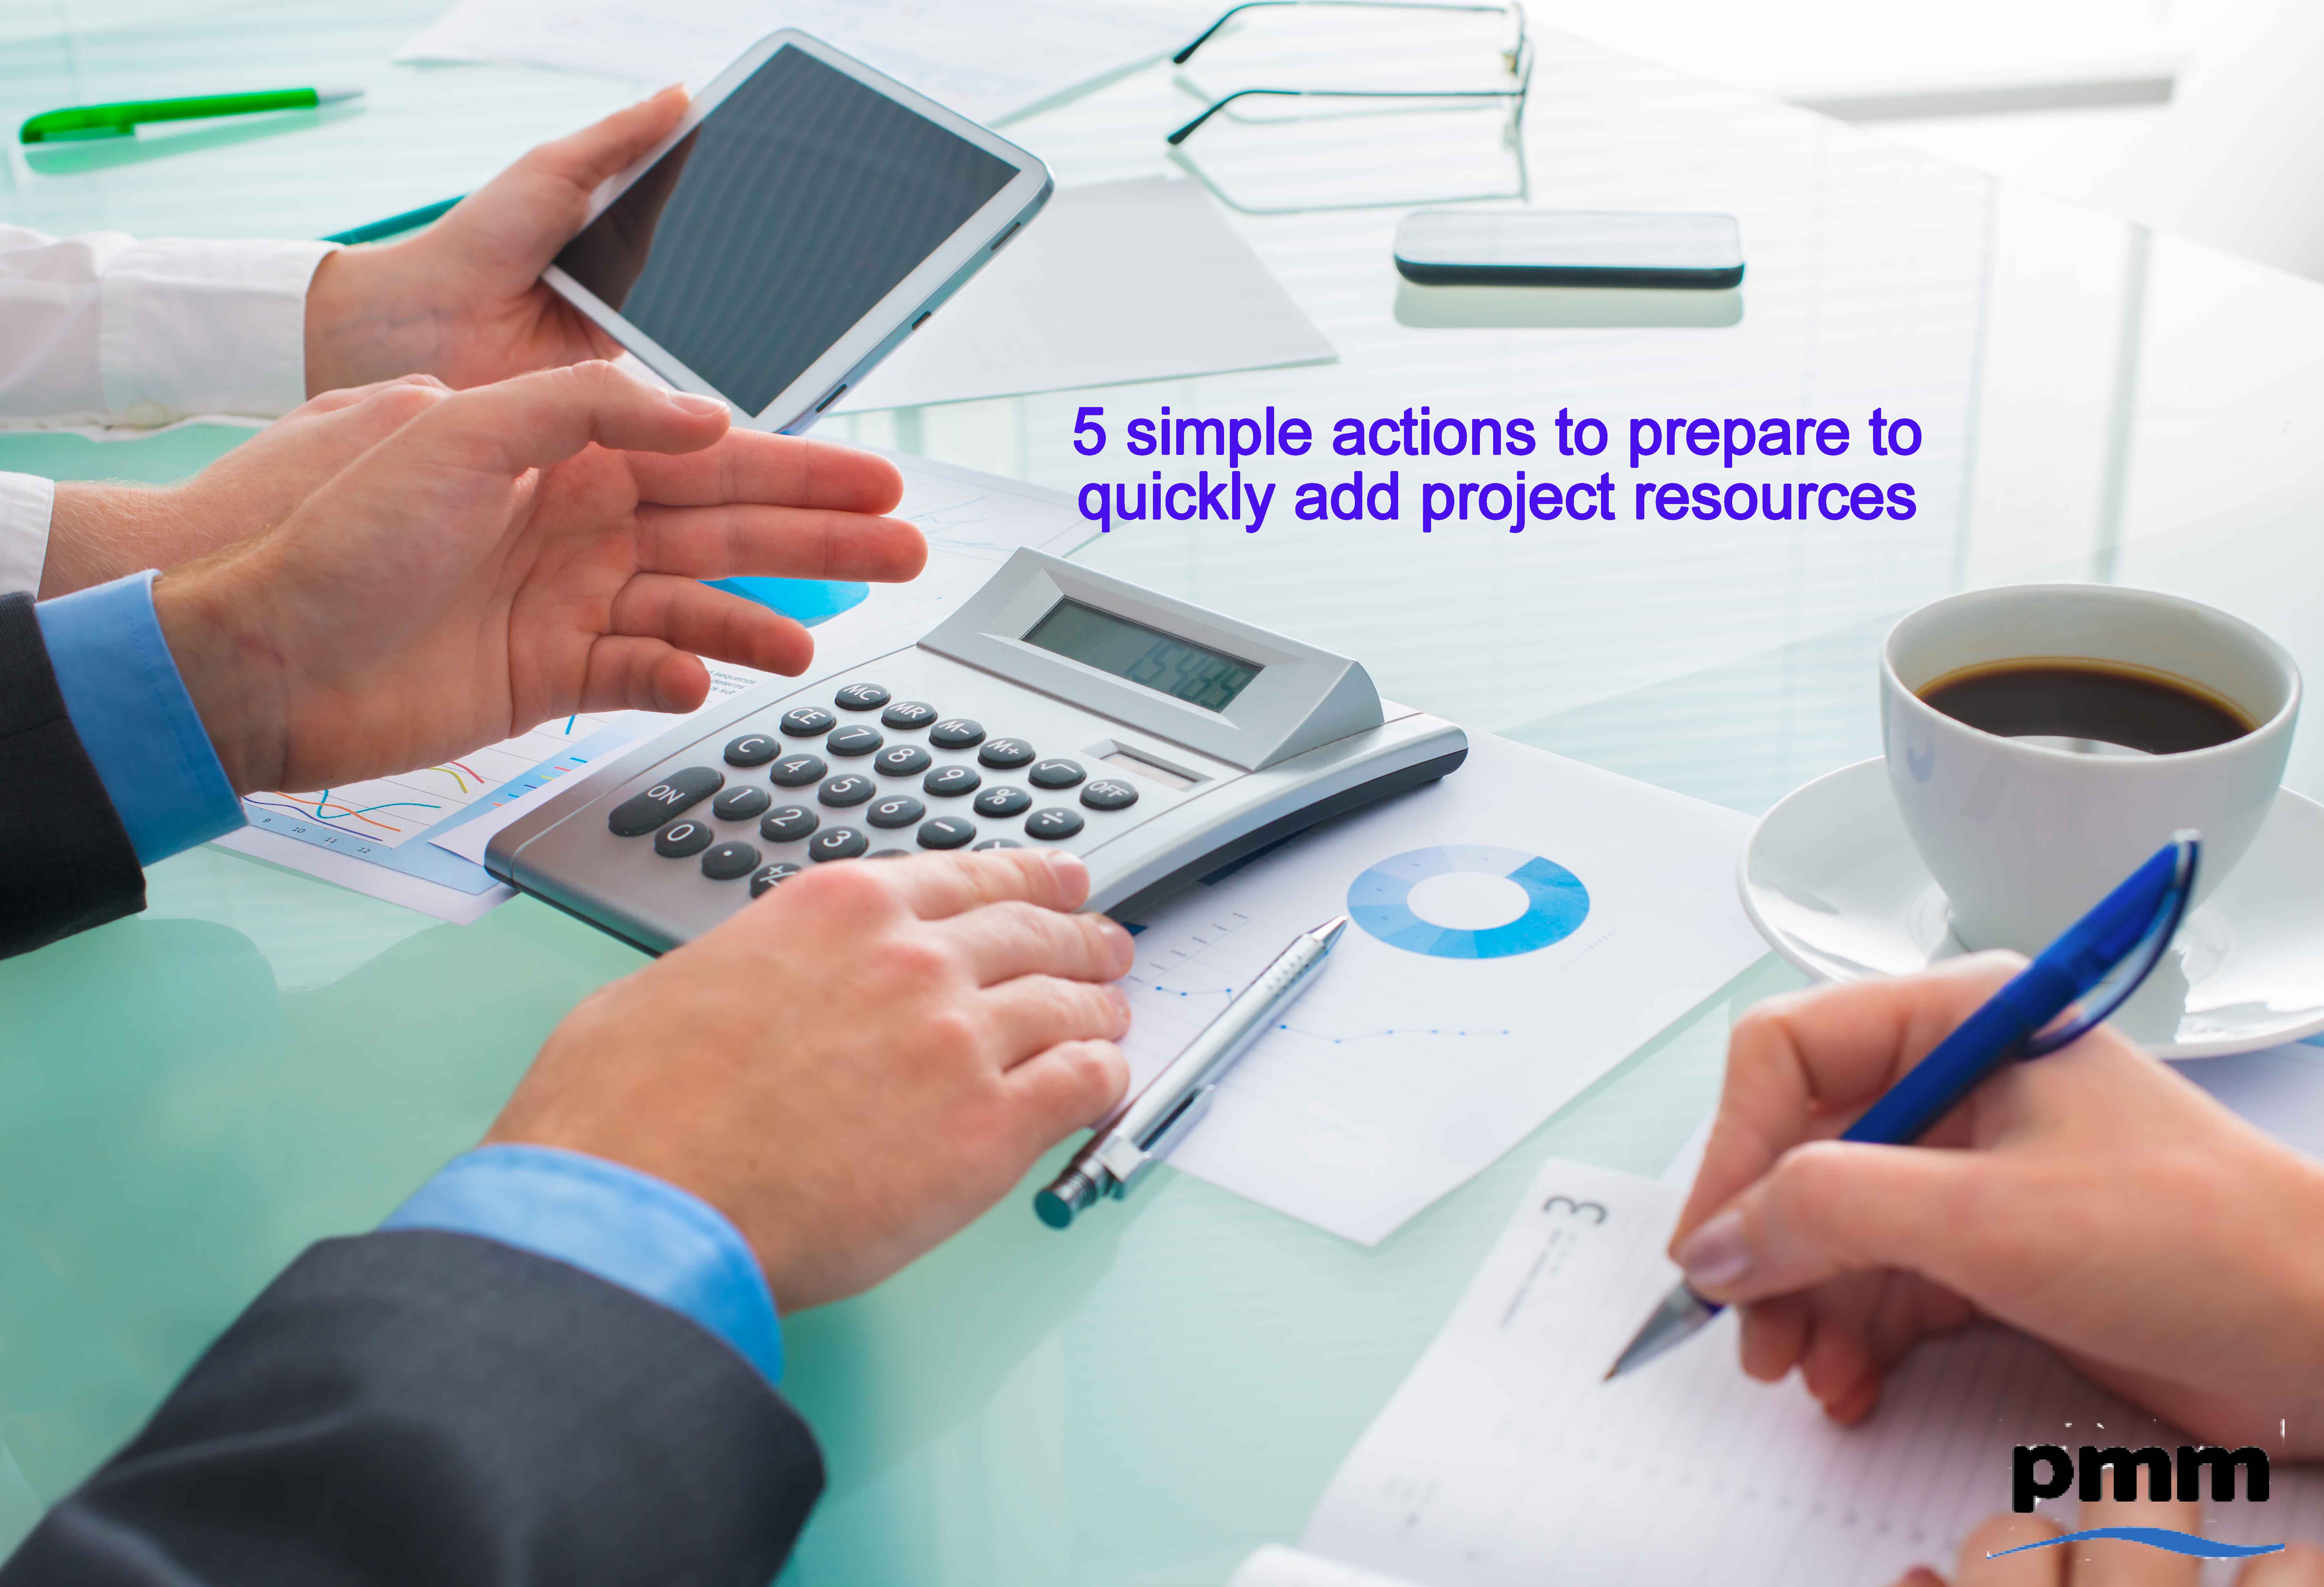 5 tips to help prepare for adding new project resources